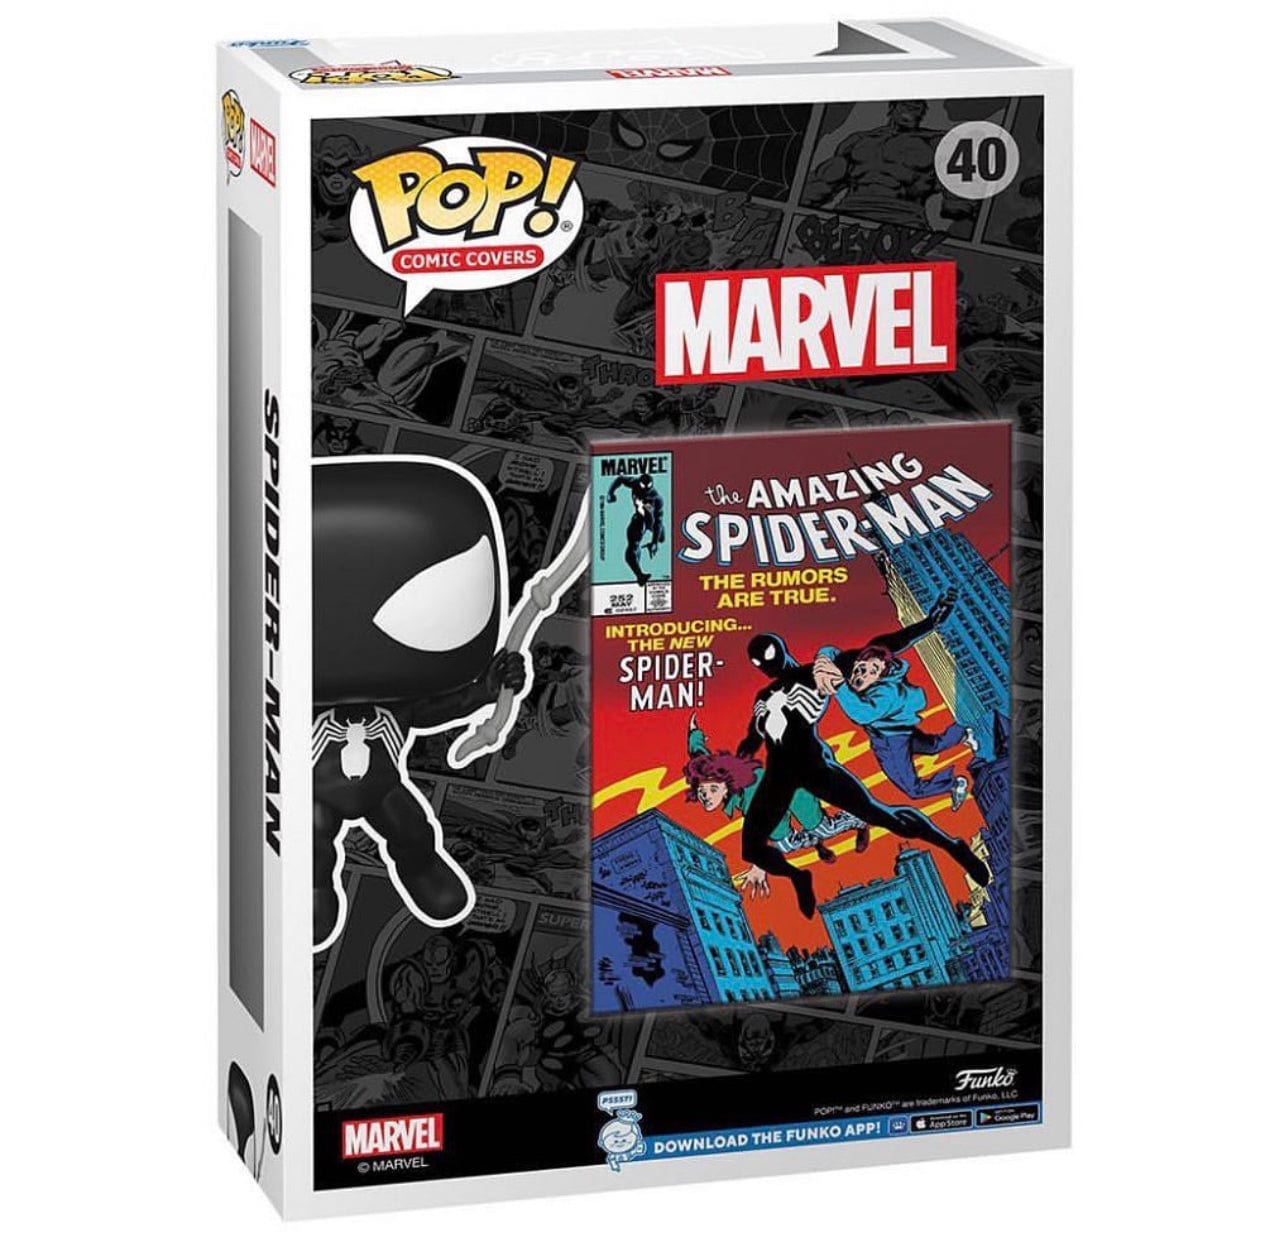 Amazing Spider-Man #252 Funko Pop! Comic Cover Figure #40 with Case Media 2 of 6